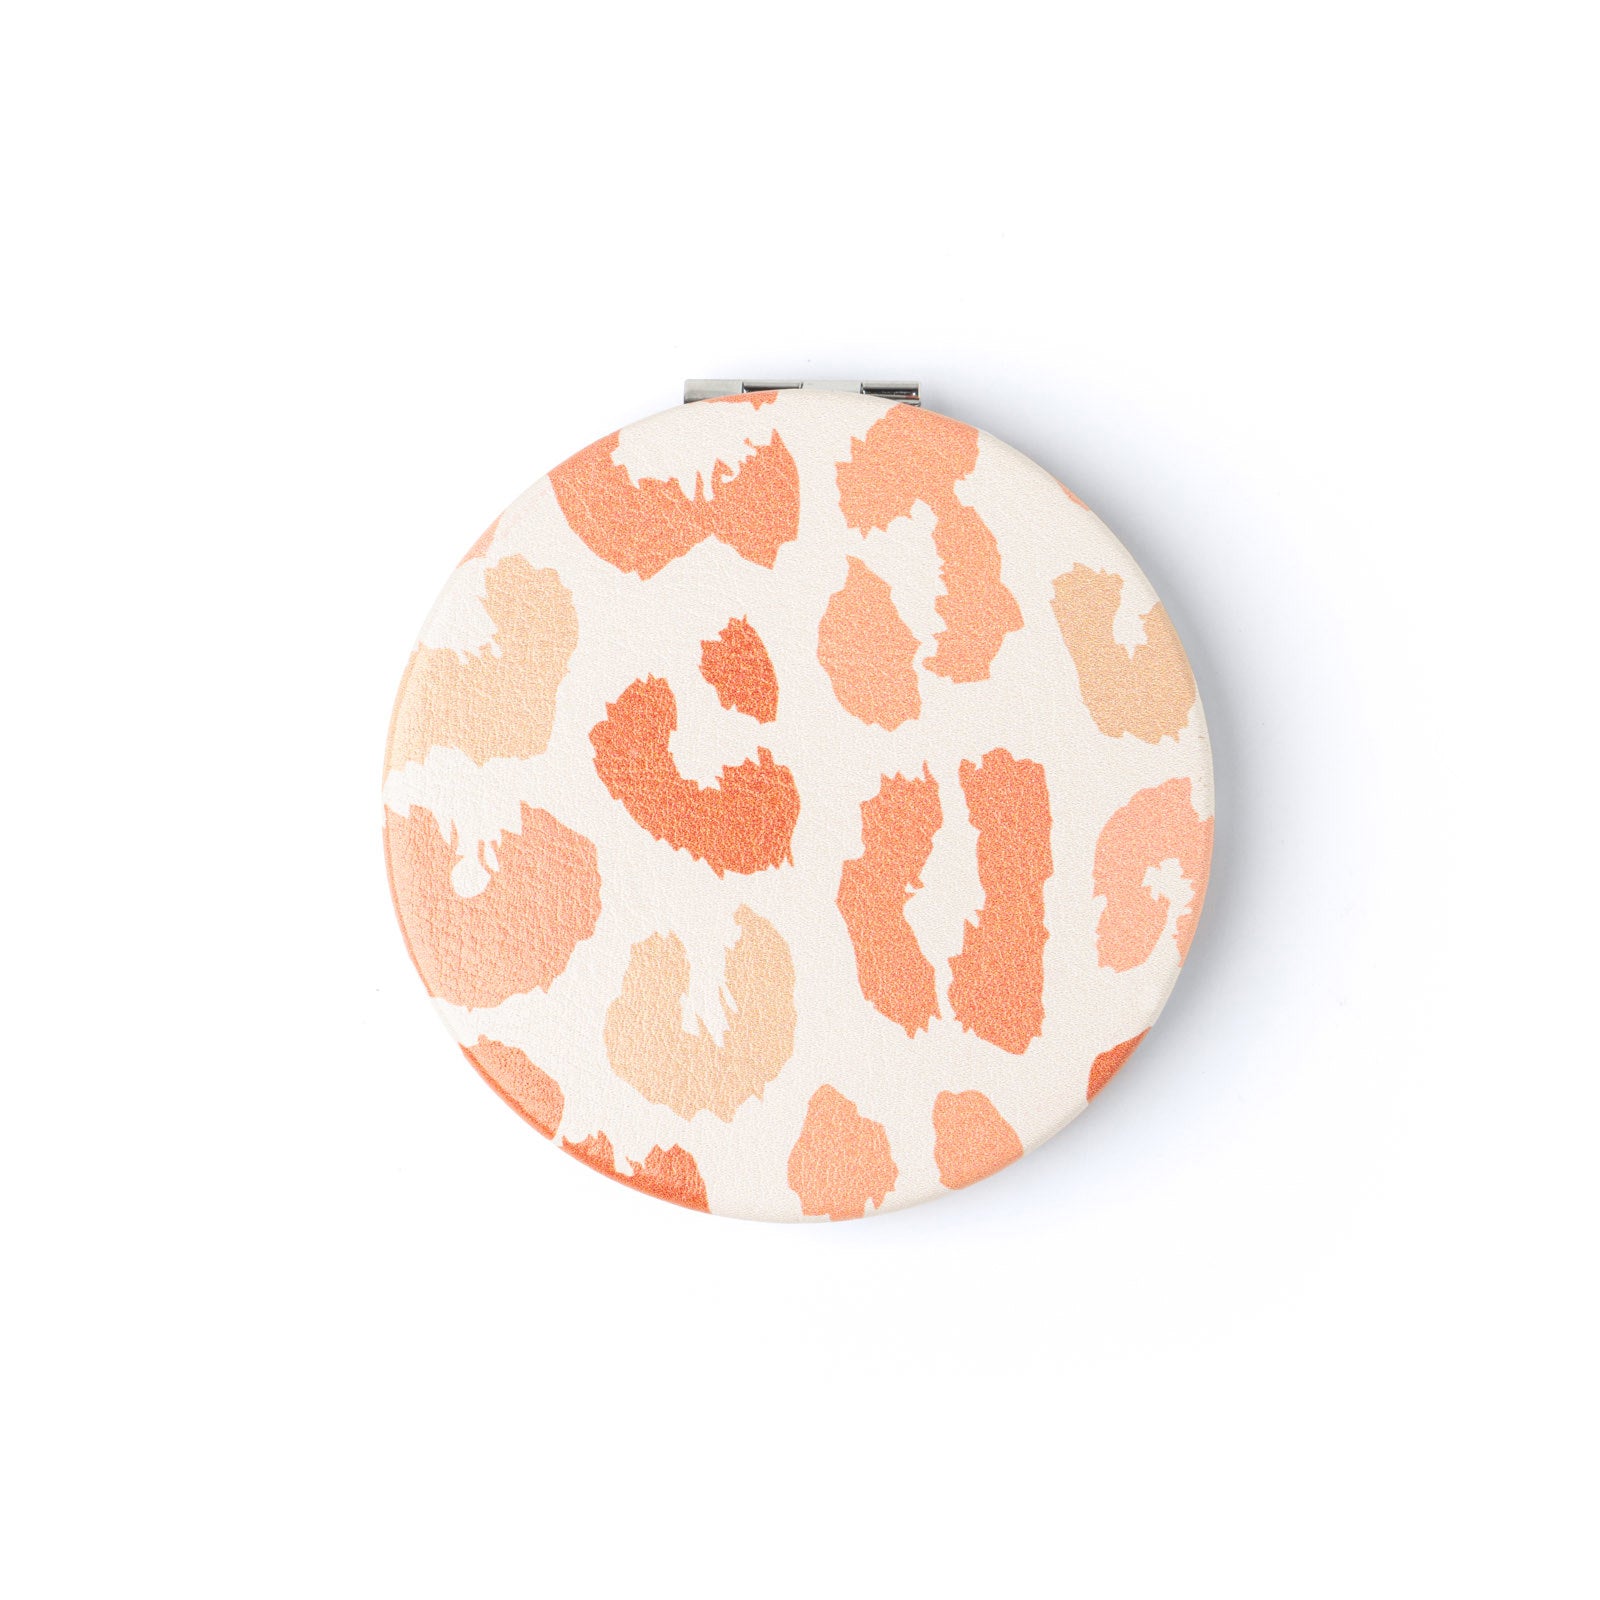 compact mirror with coral cheetah pattern.